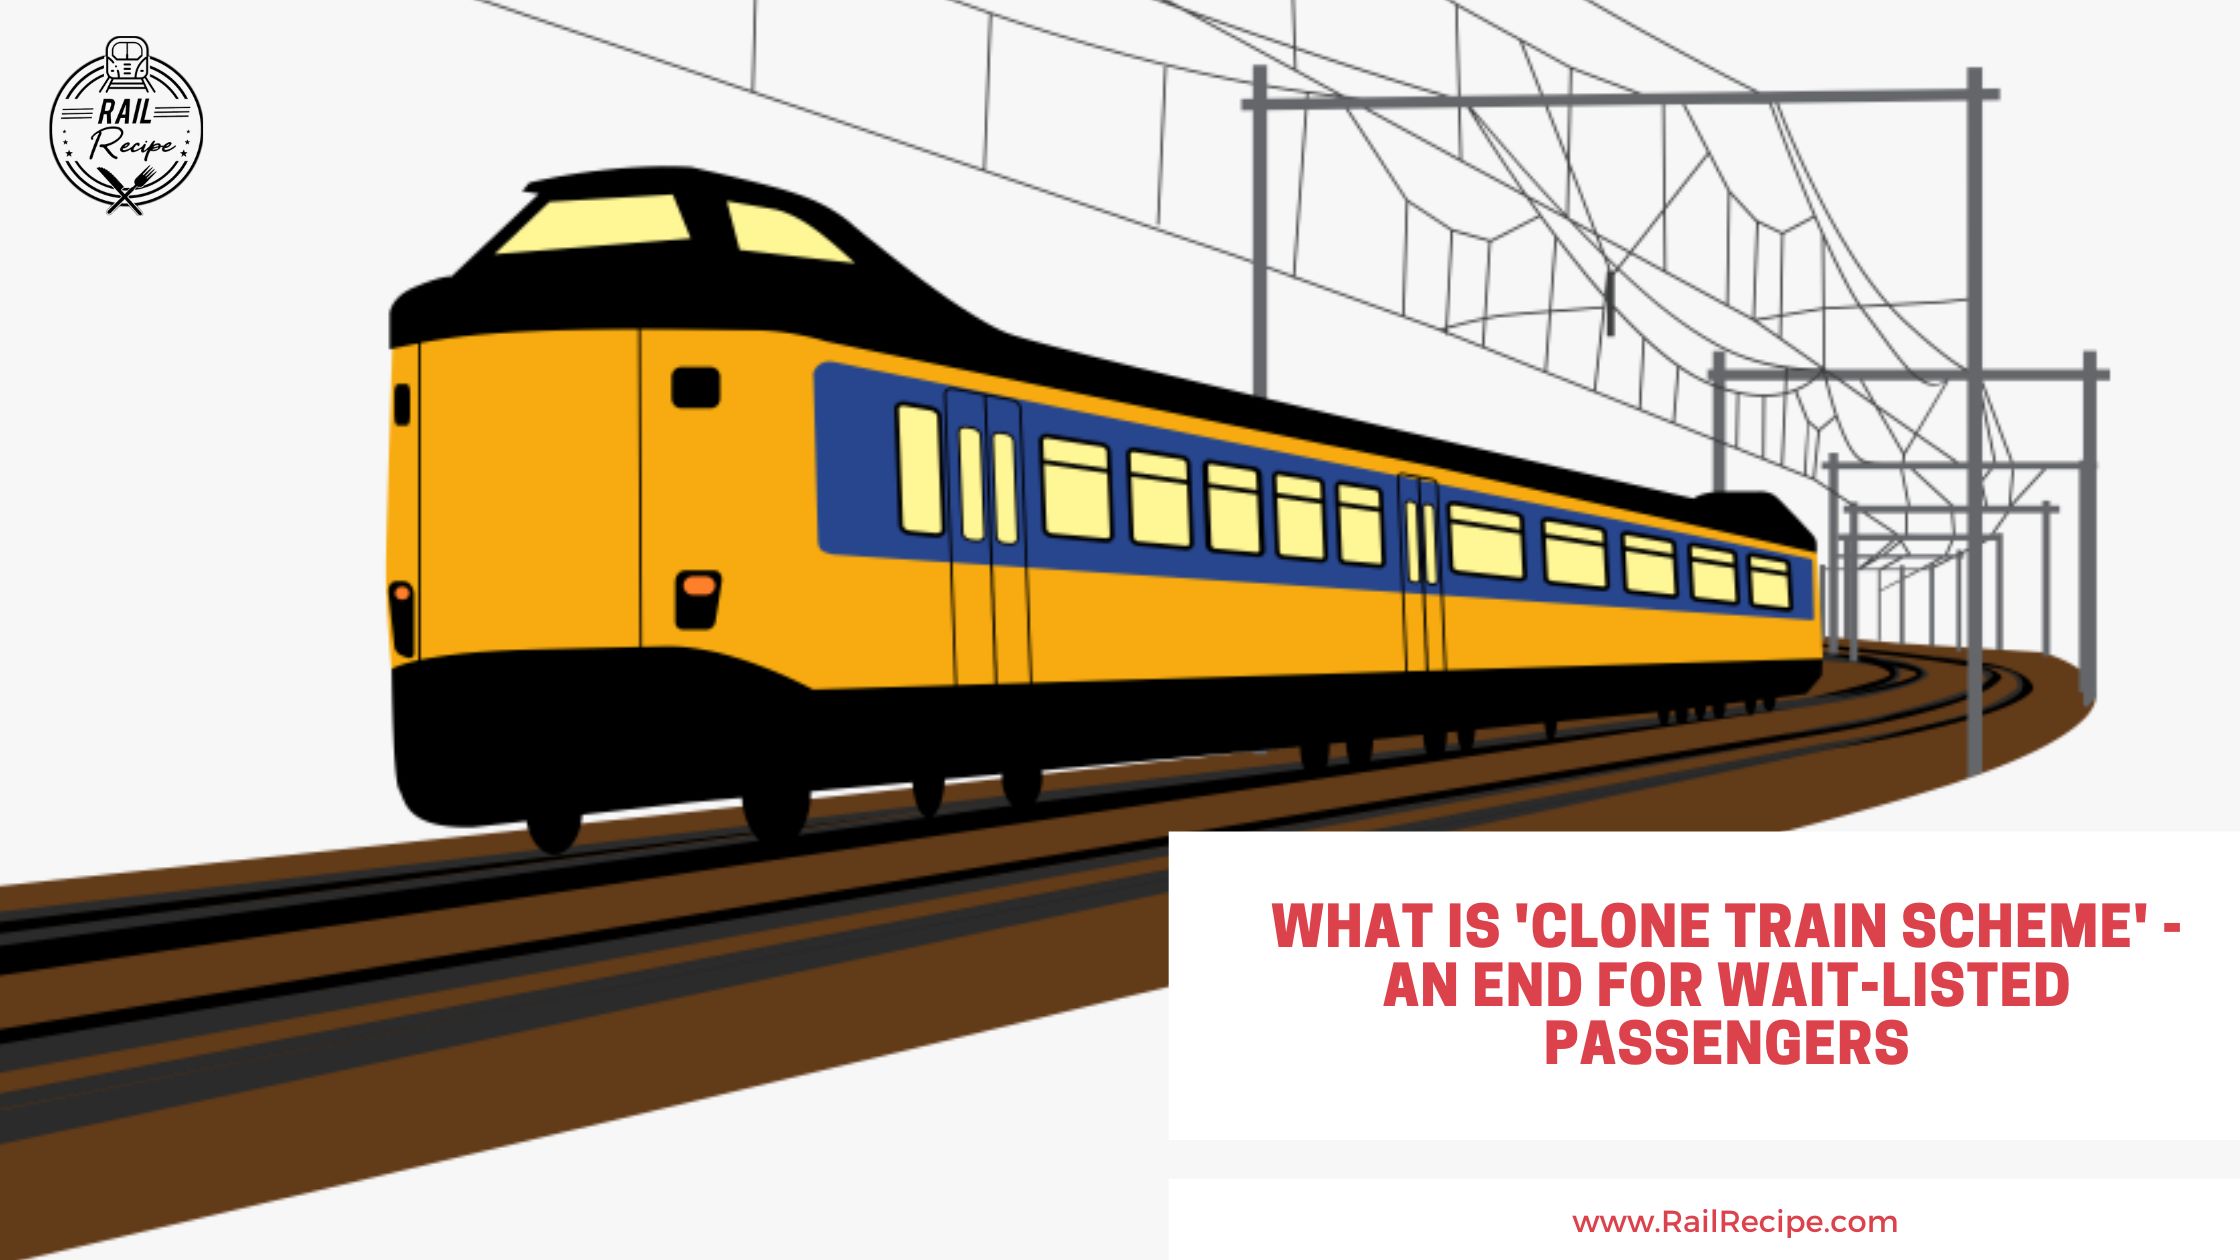 What is 'Clone Train Scheme' - An End for Wait-Listed Passengers